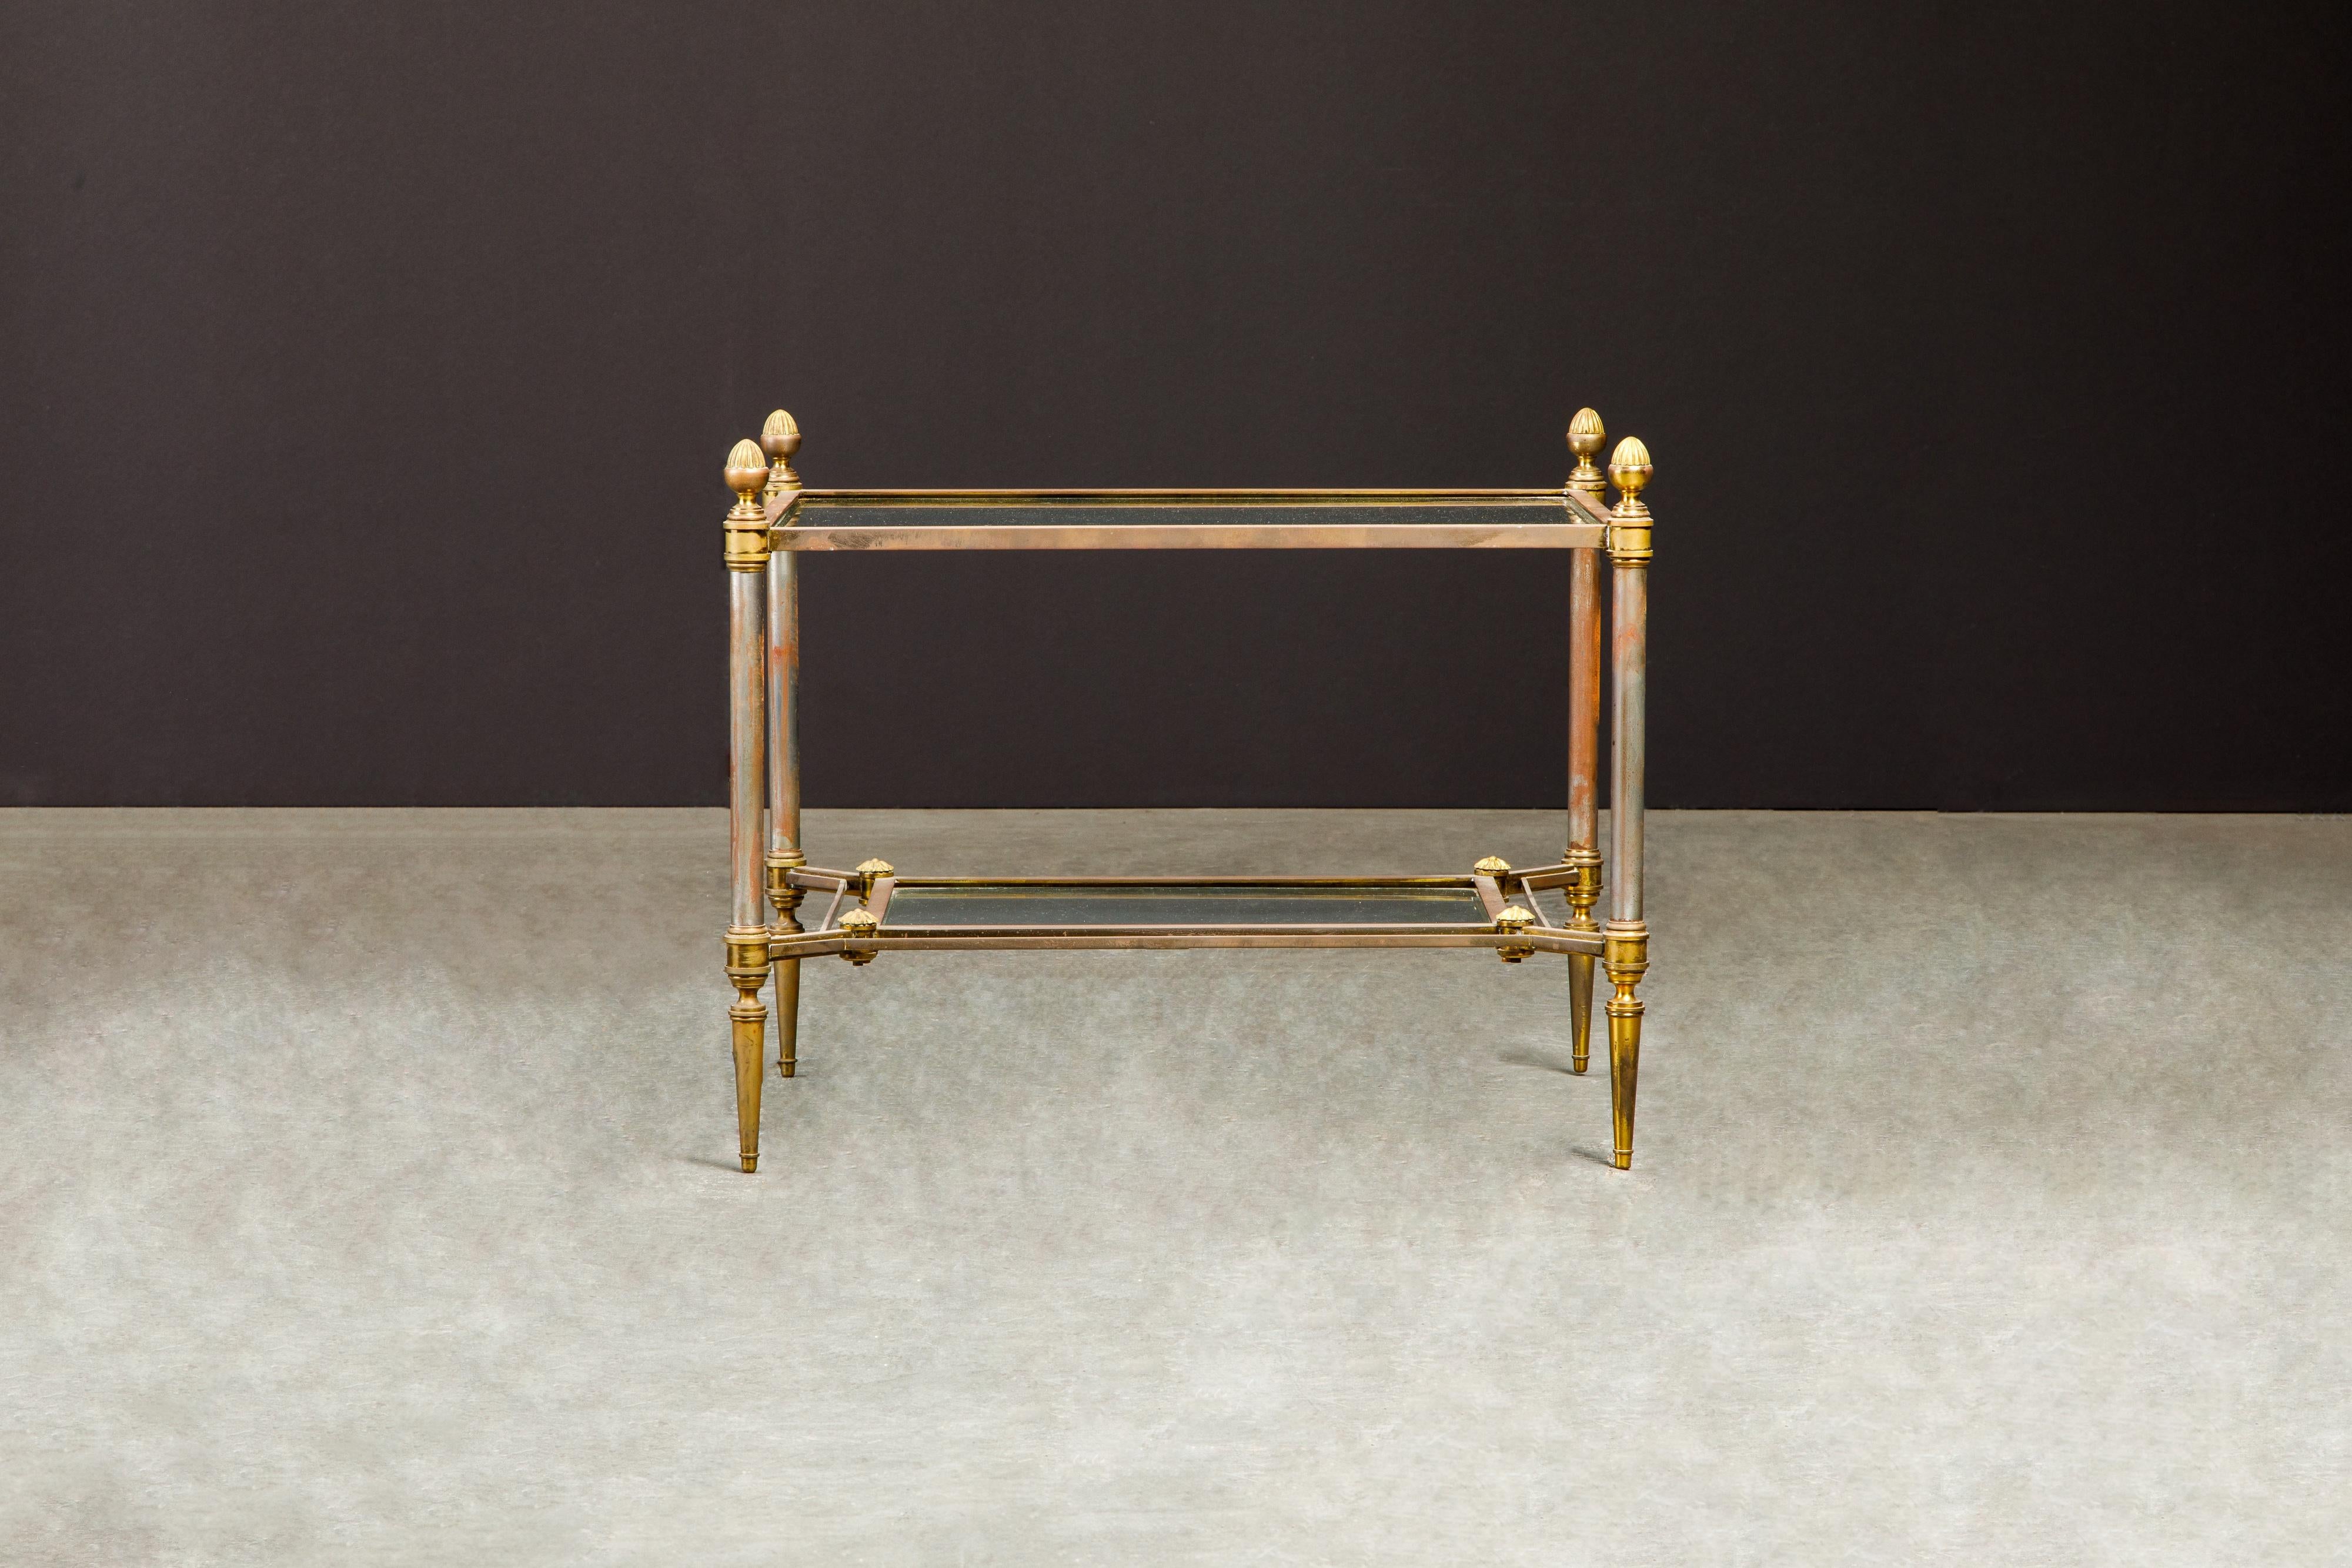 A beautiful brass, steel and glass tiered side table, attributed to Maison Jansen circa 1960, has plenty of patina developed over years which is attractive in of itself, or can be polished to remove this patina if desired. 

This attractive Jansen